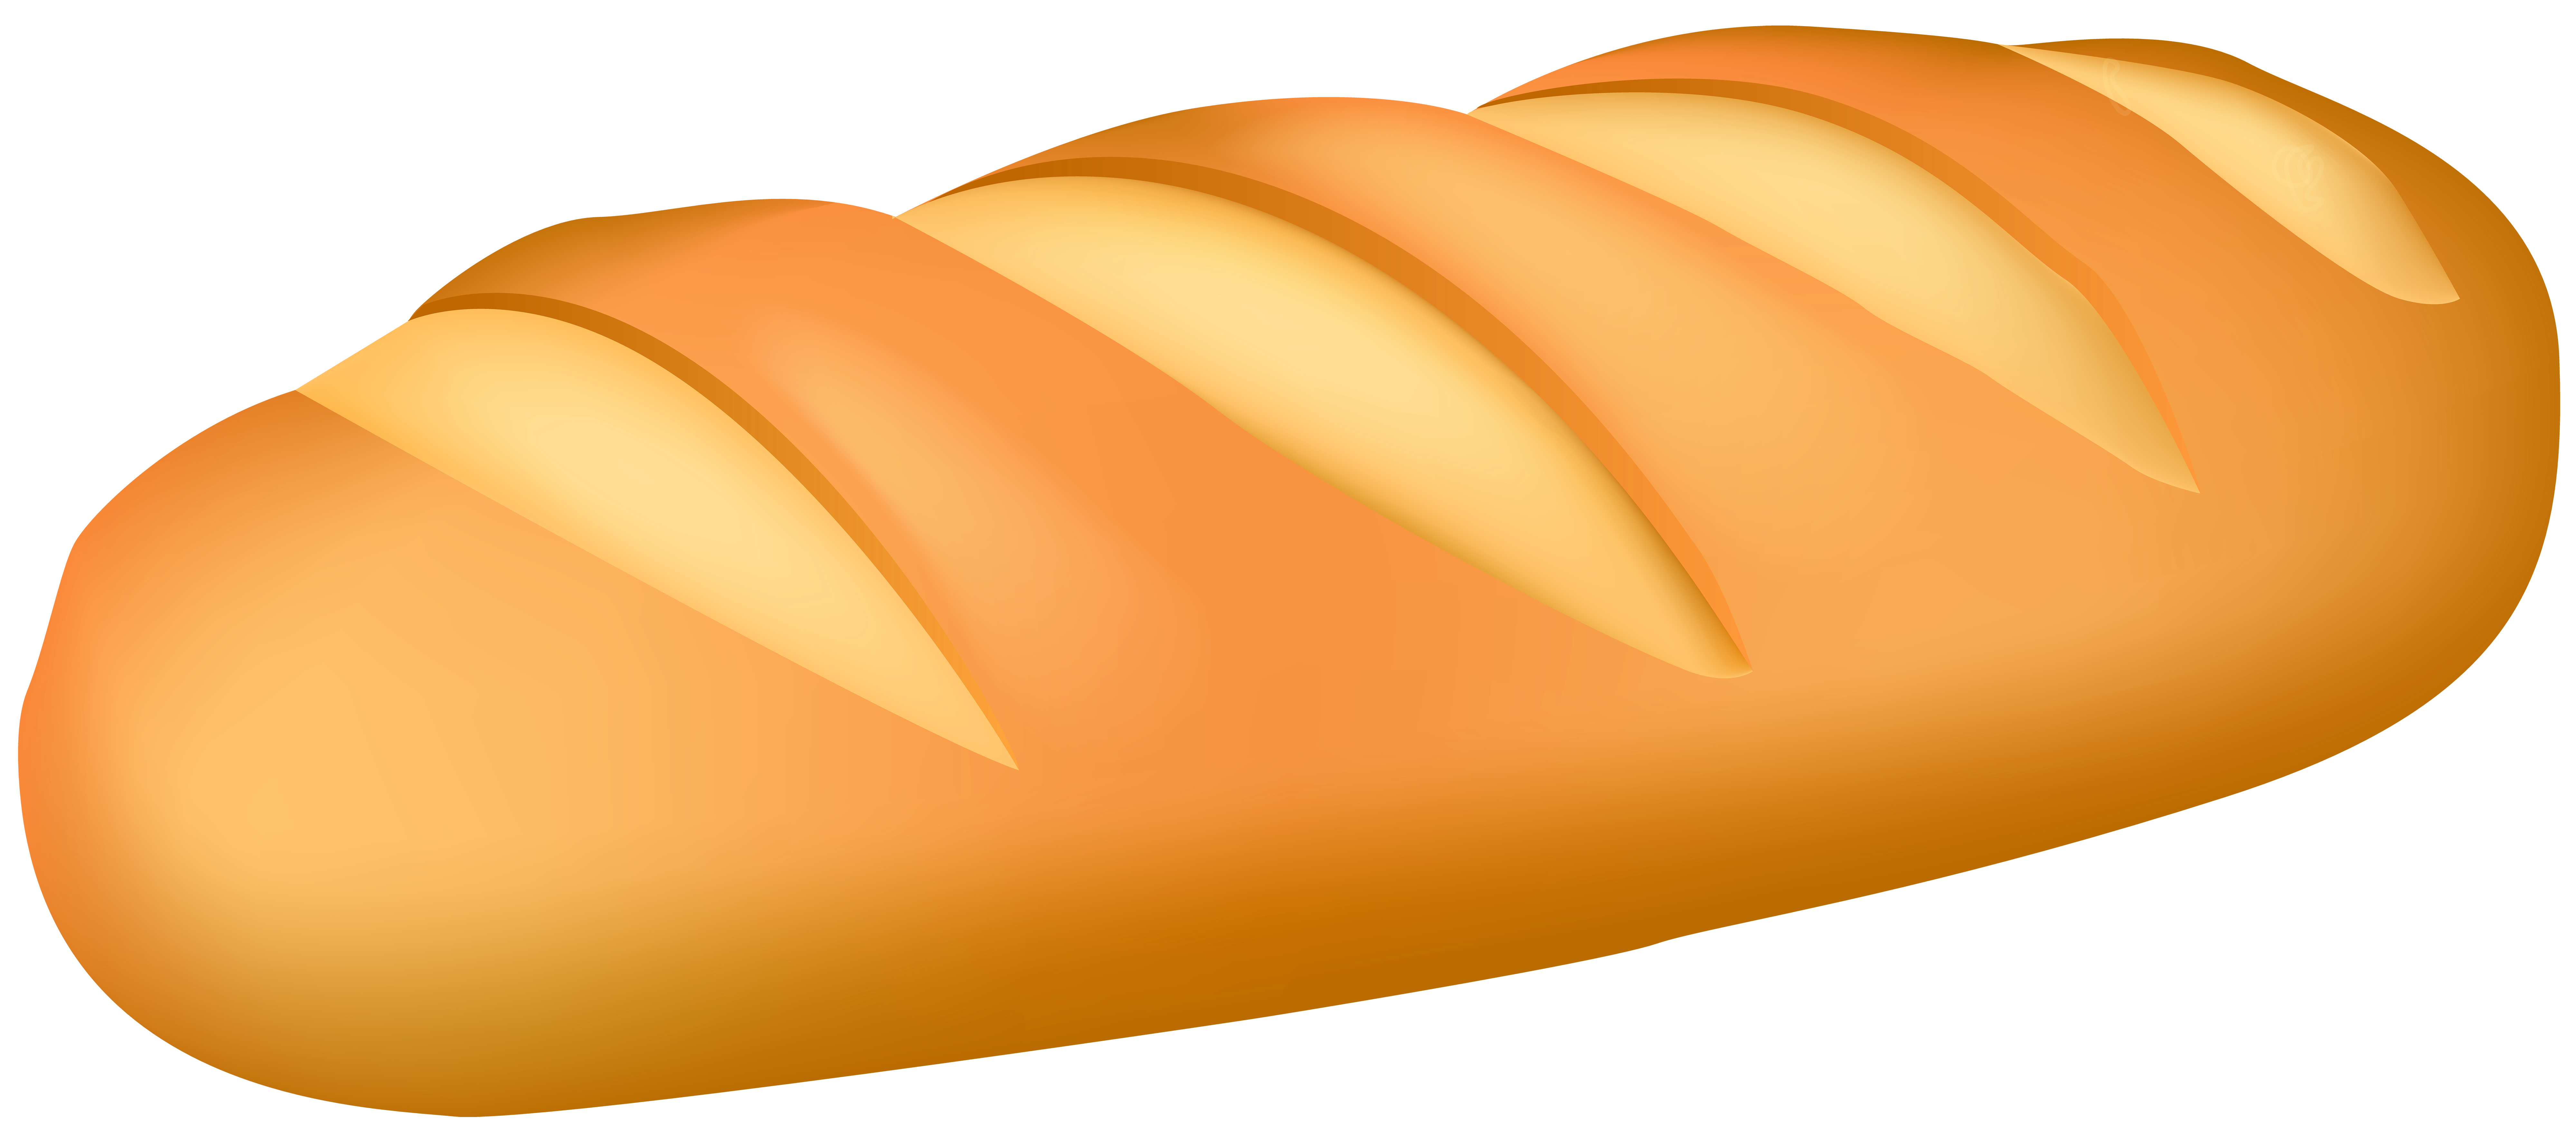 bread clipart loaf bread